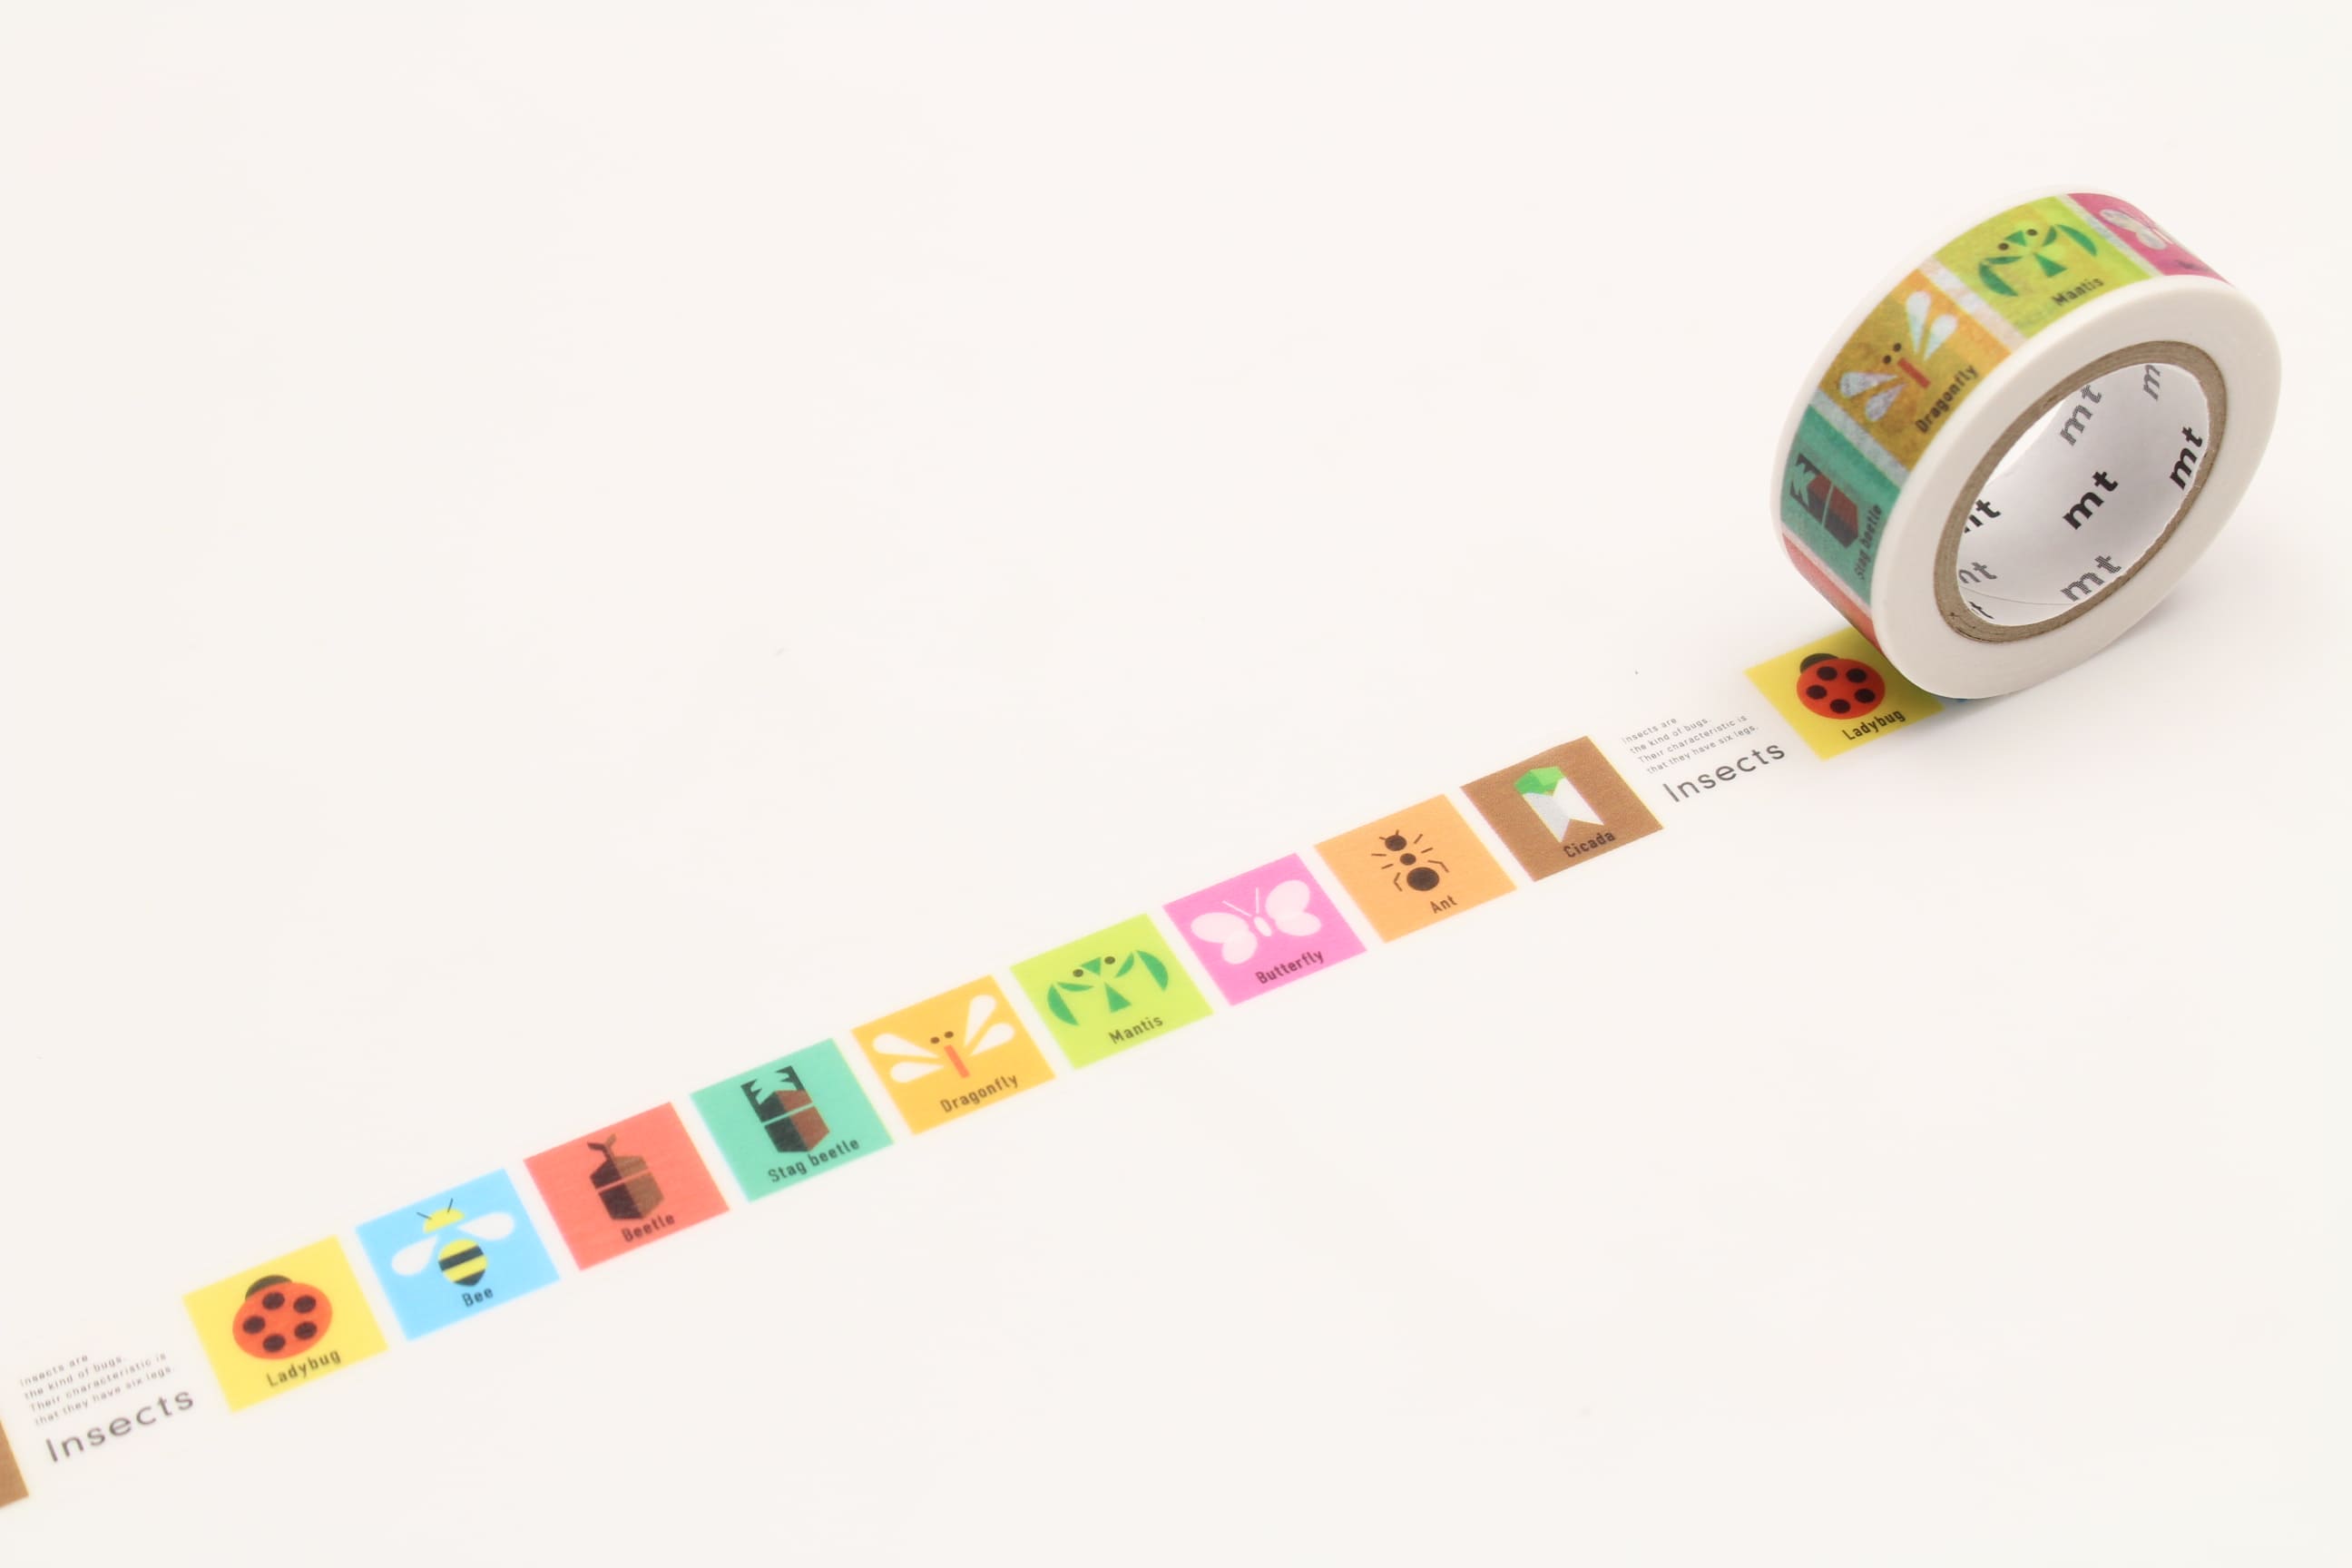 mt for Kids - Insects - 15mm Washi Tape